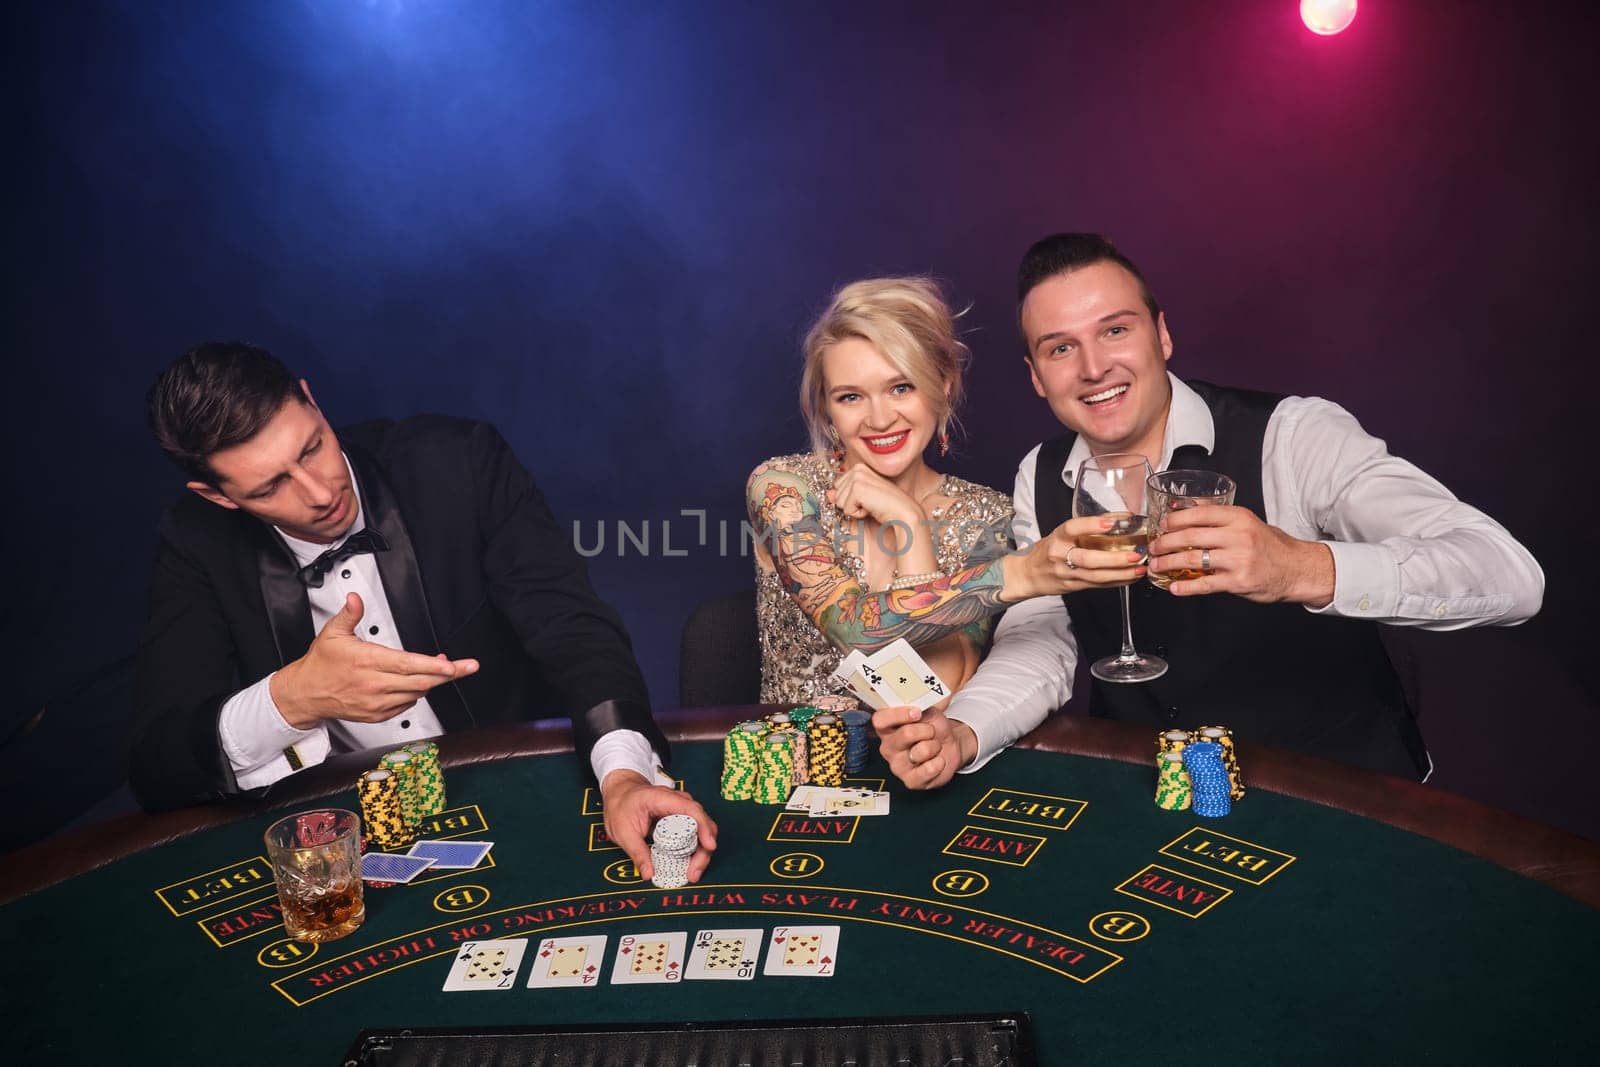 Two elegant male and attractive female are playing poker at casino. Youth are making bets waiting for a big win. They are smiling and posing sitting at the table against a red and blue backlights on black smoke background. Cards, chips, money, gambling, entertainment concept.